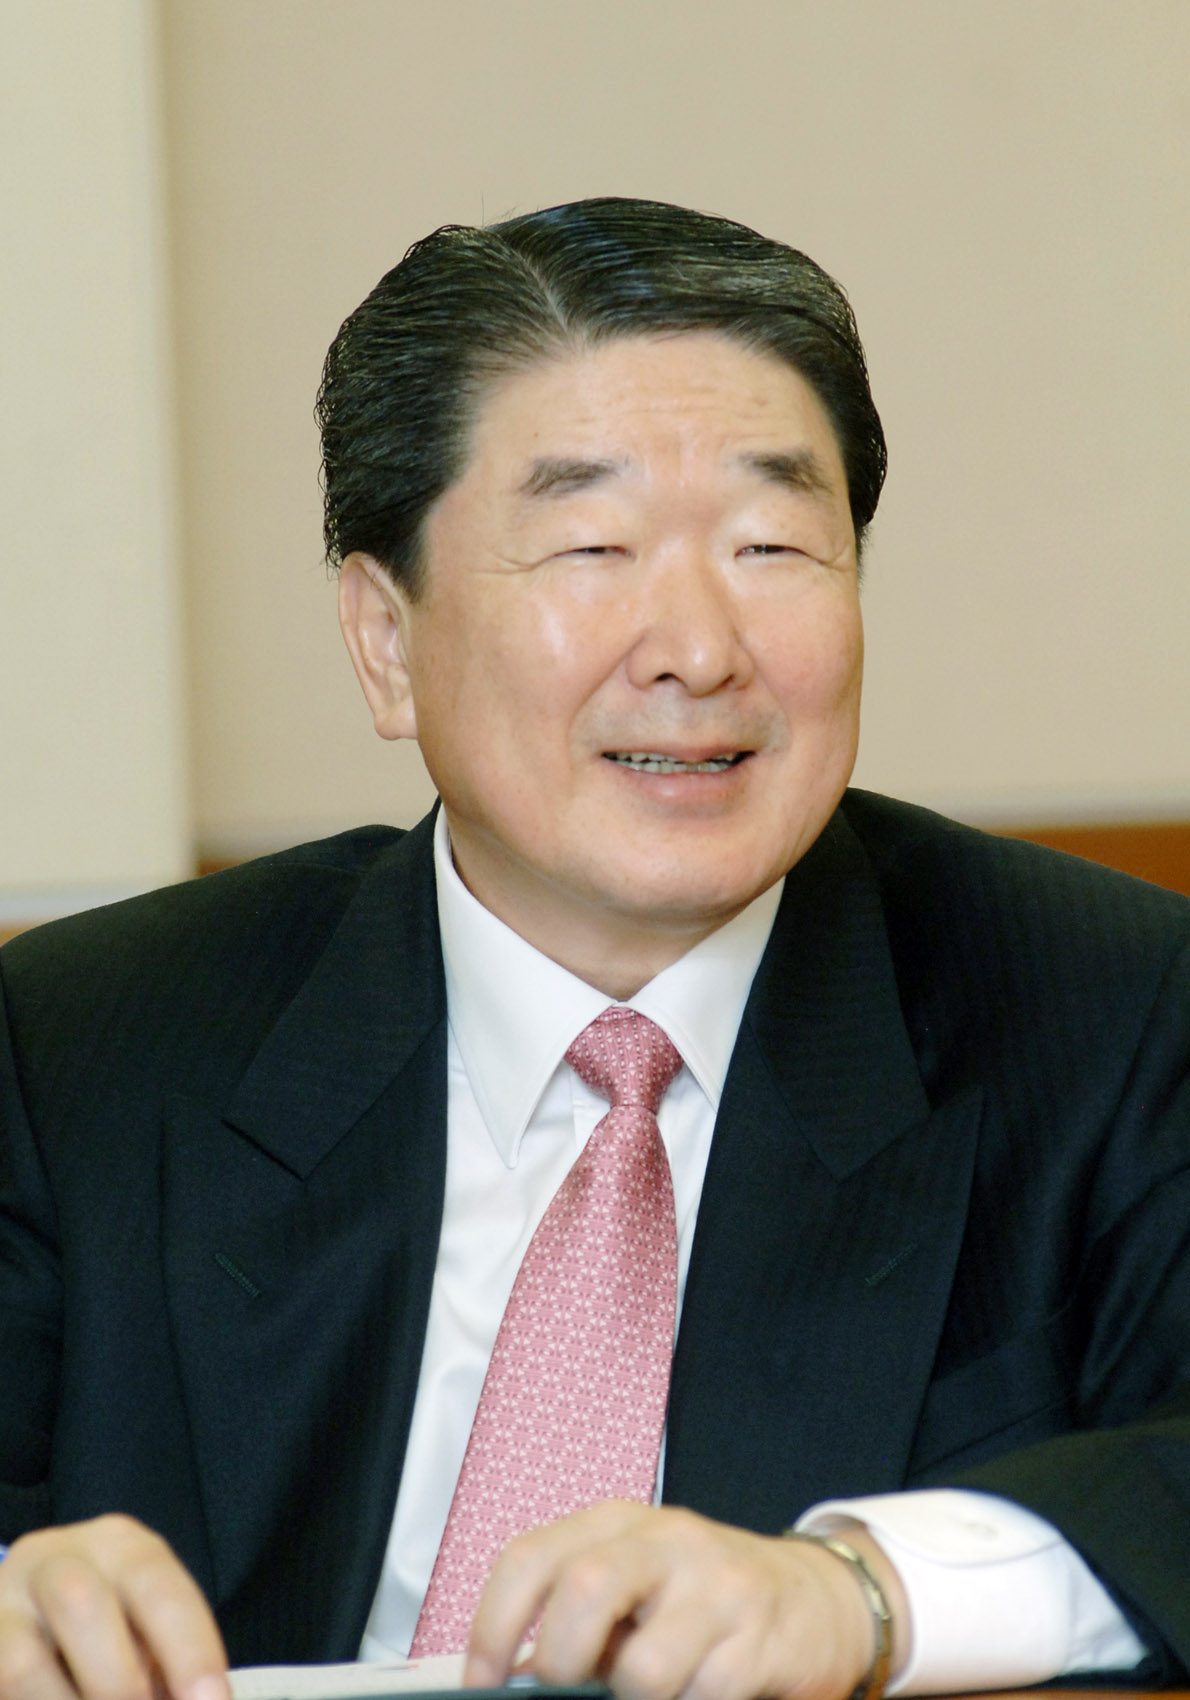 asian businessman in suit and pink tie sitting down